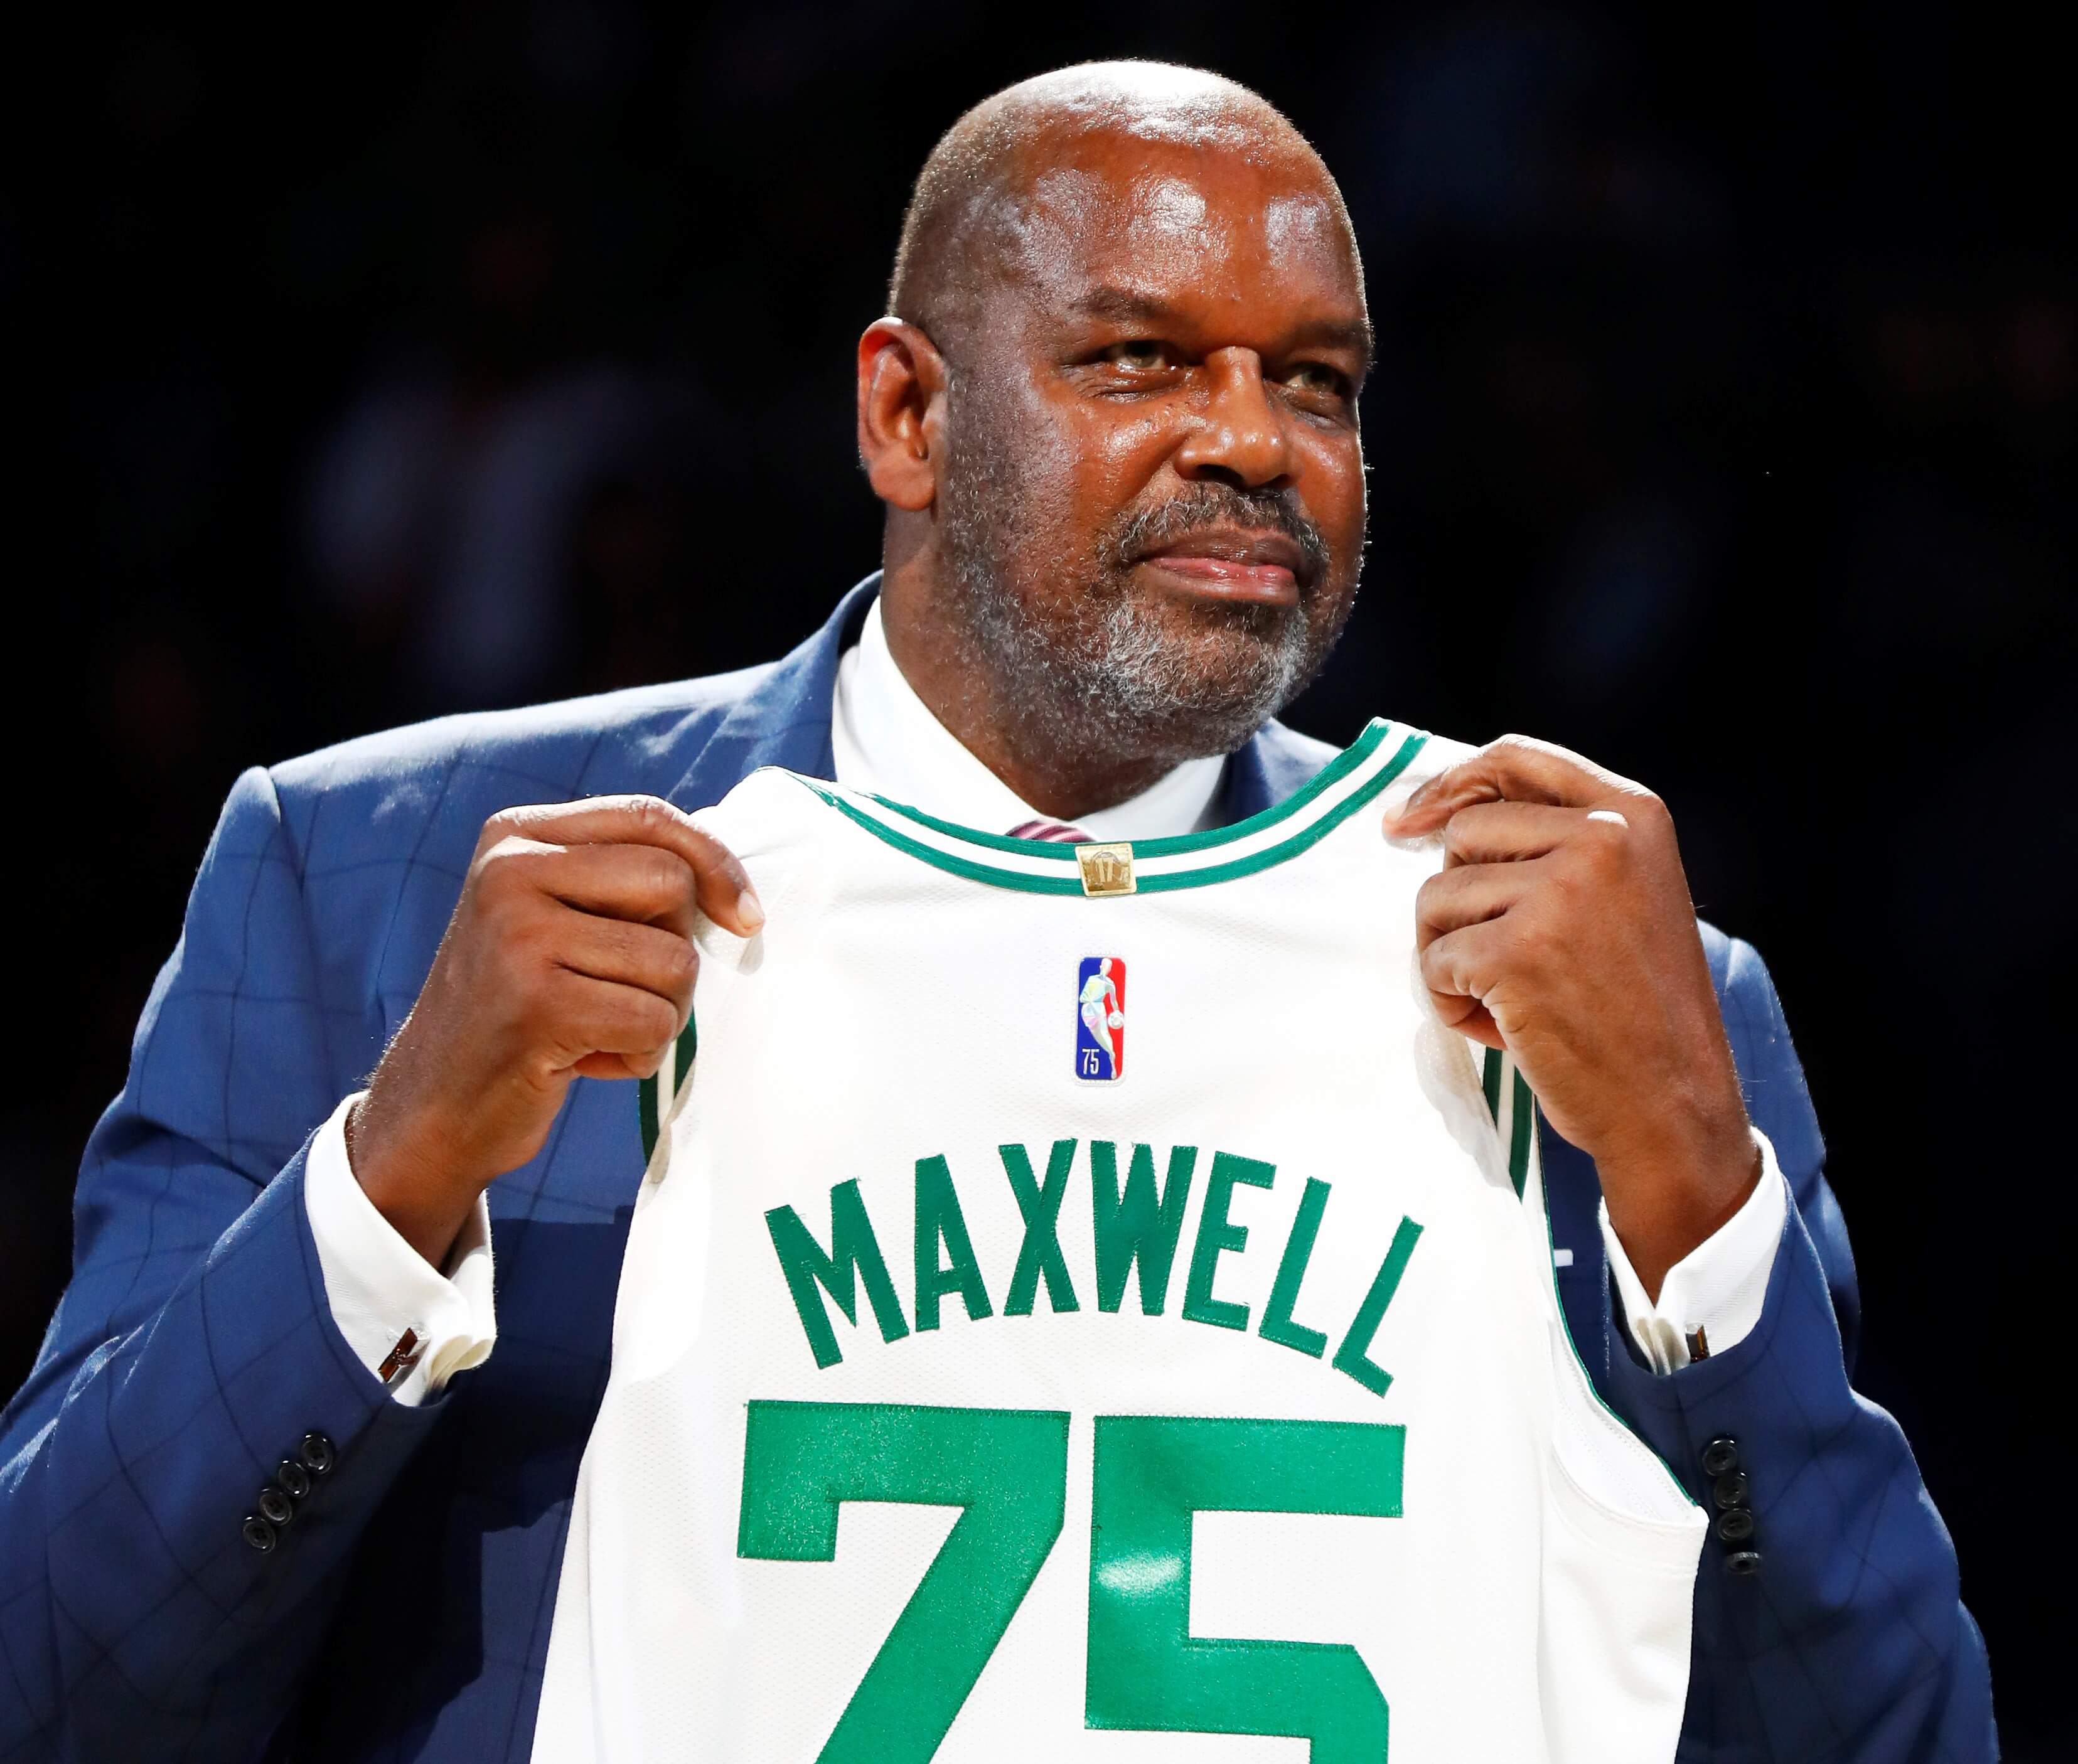 Former Boston Celtics player Cedric Maxwell holds up a jersey.